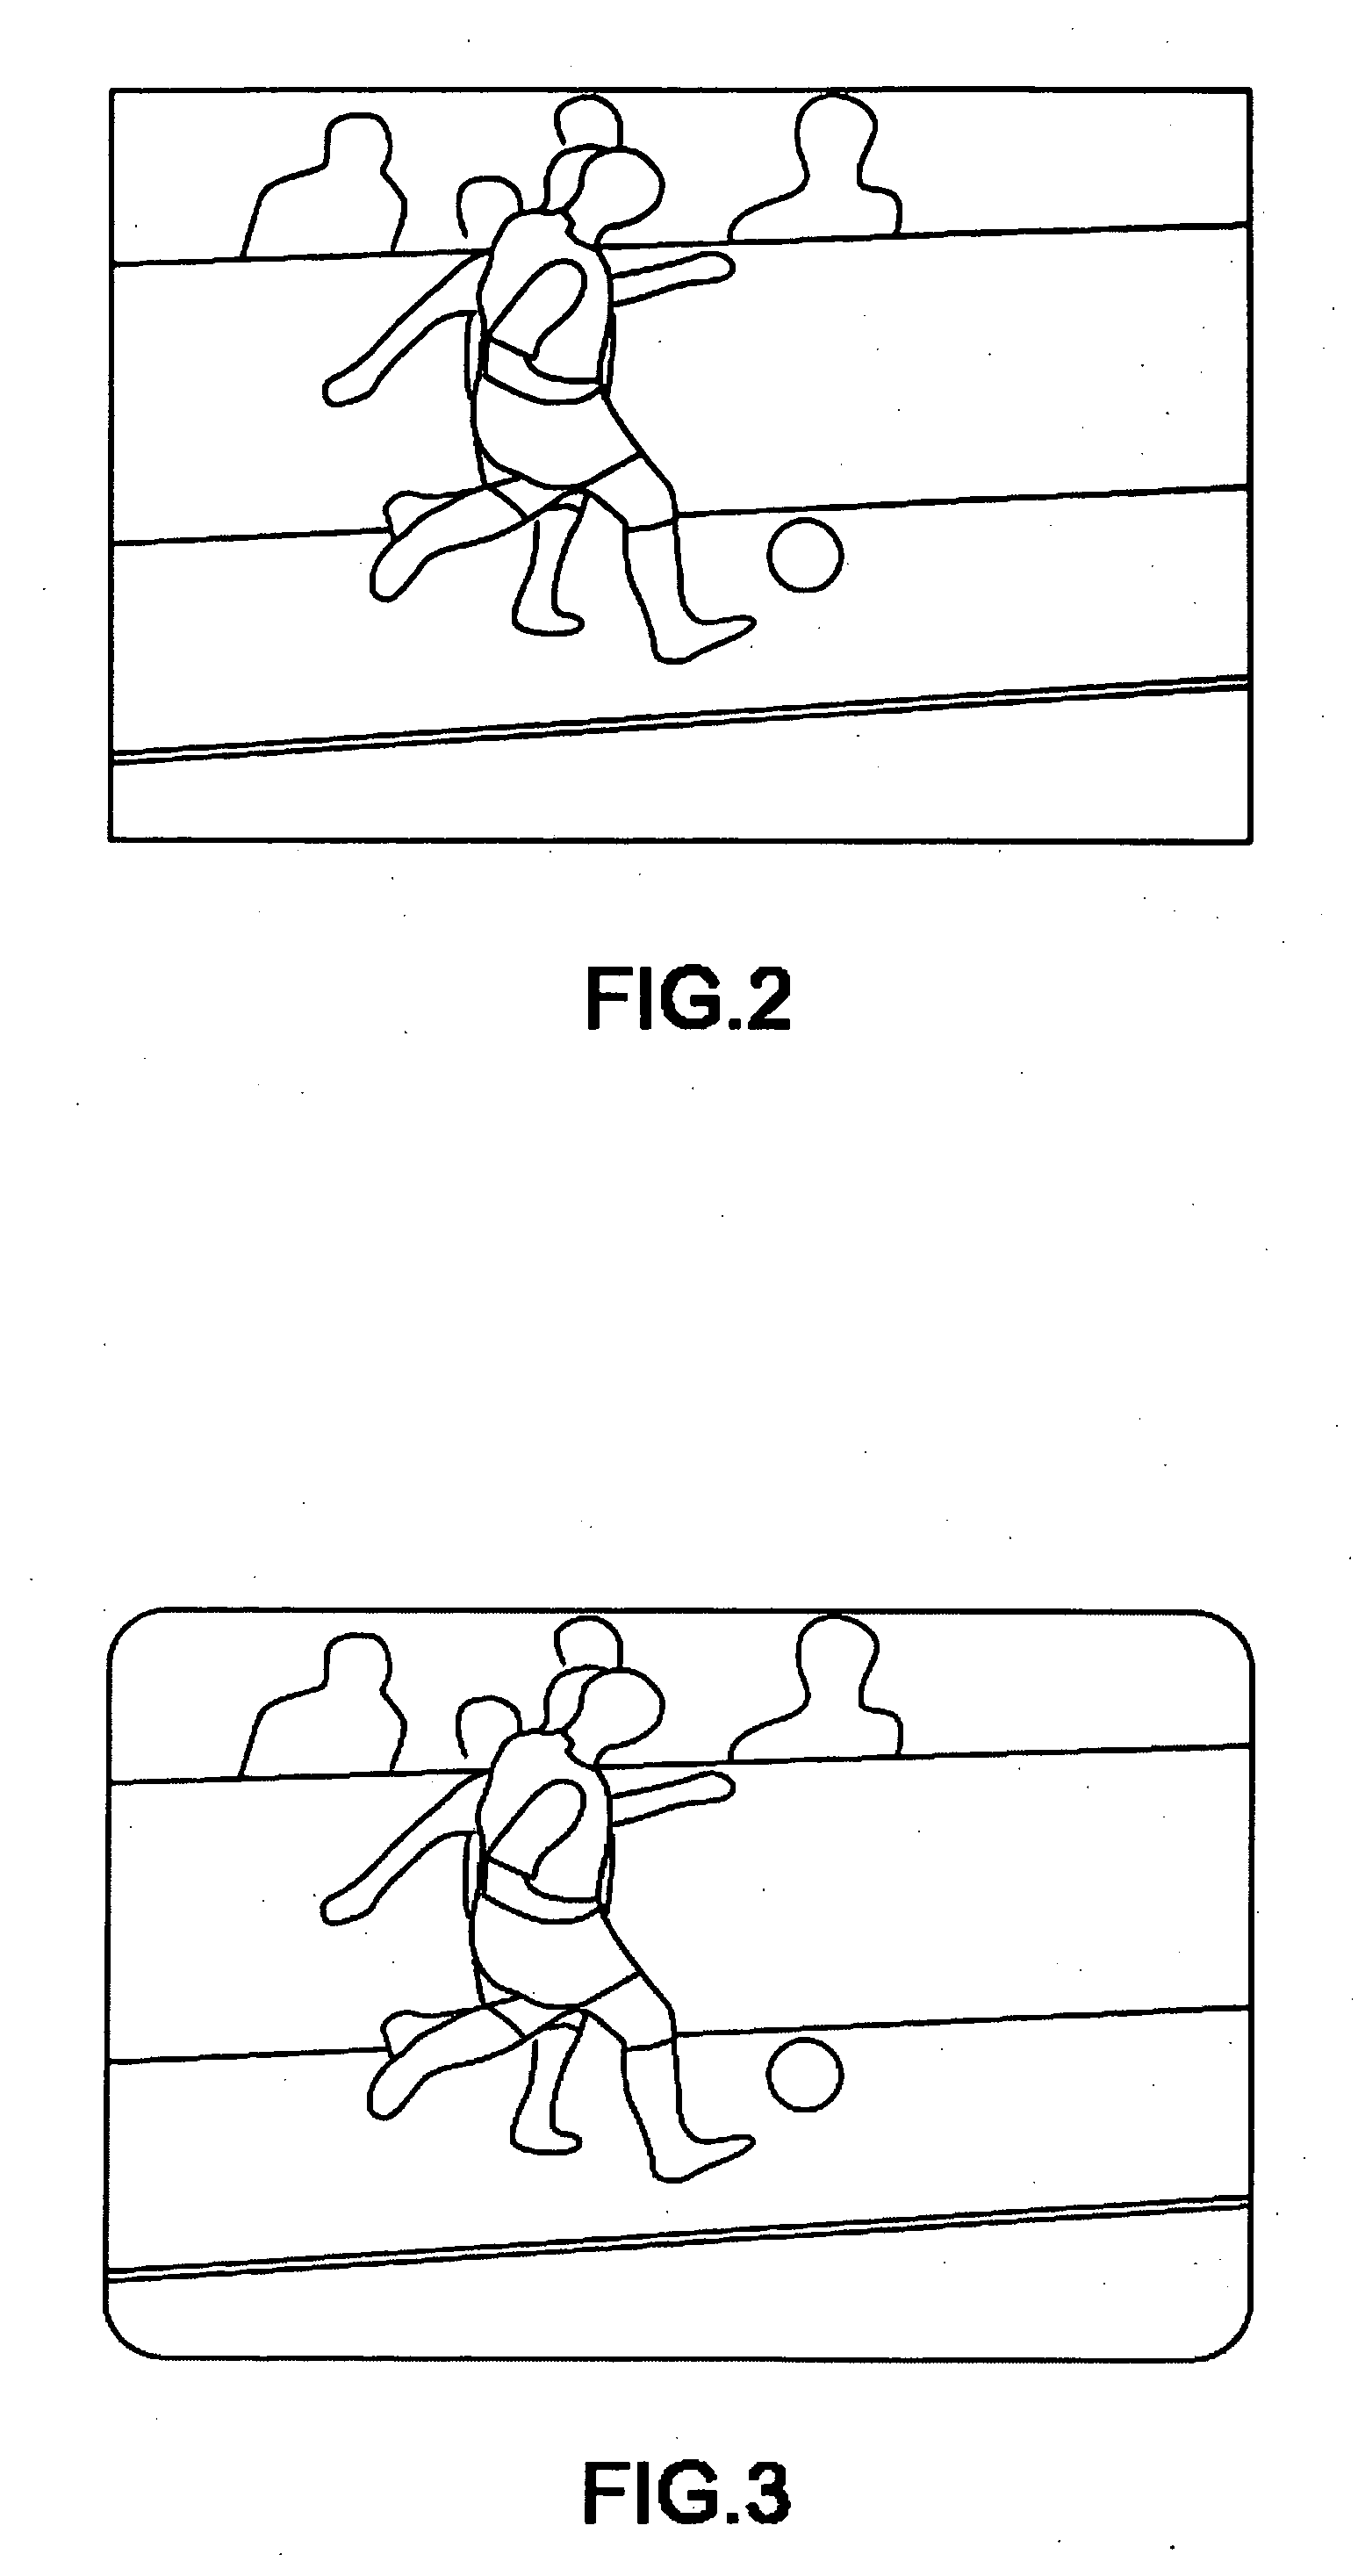 Method of viewing audiovisual documents on a receiver, and receiver for viewing such documents